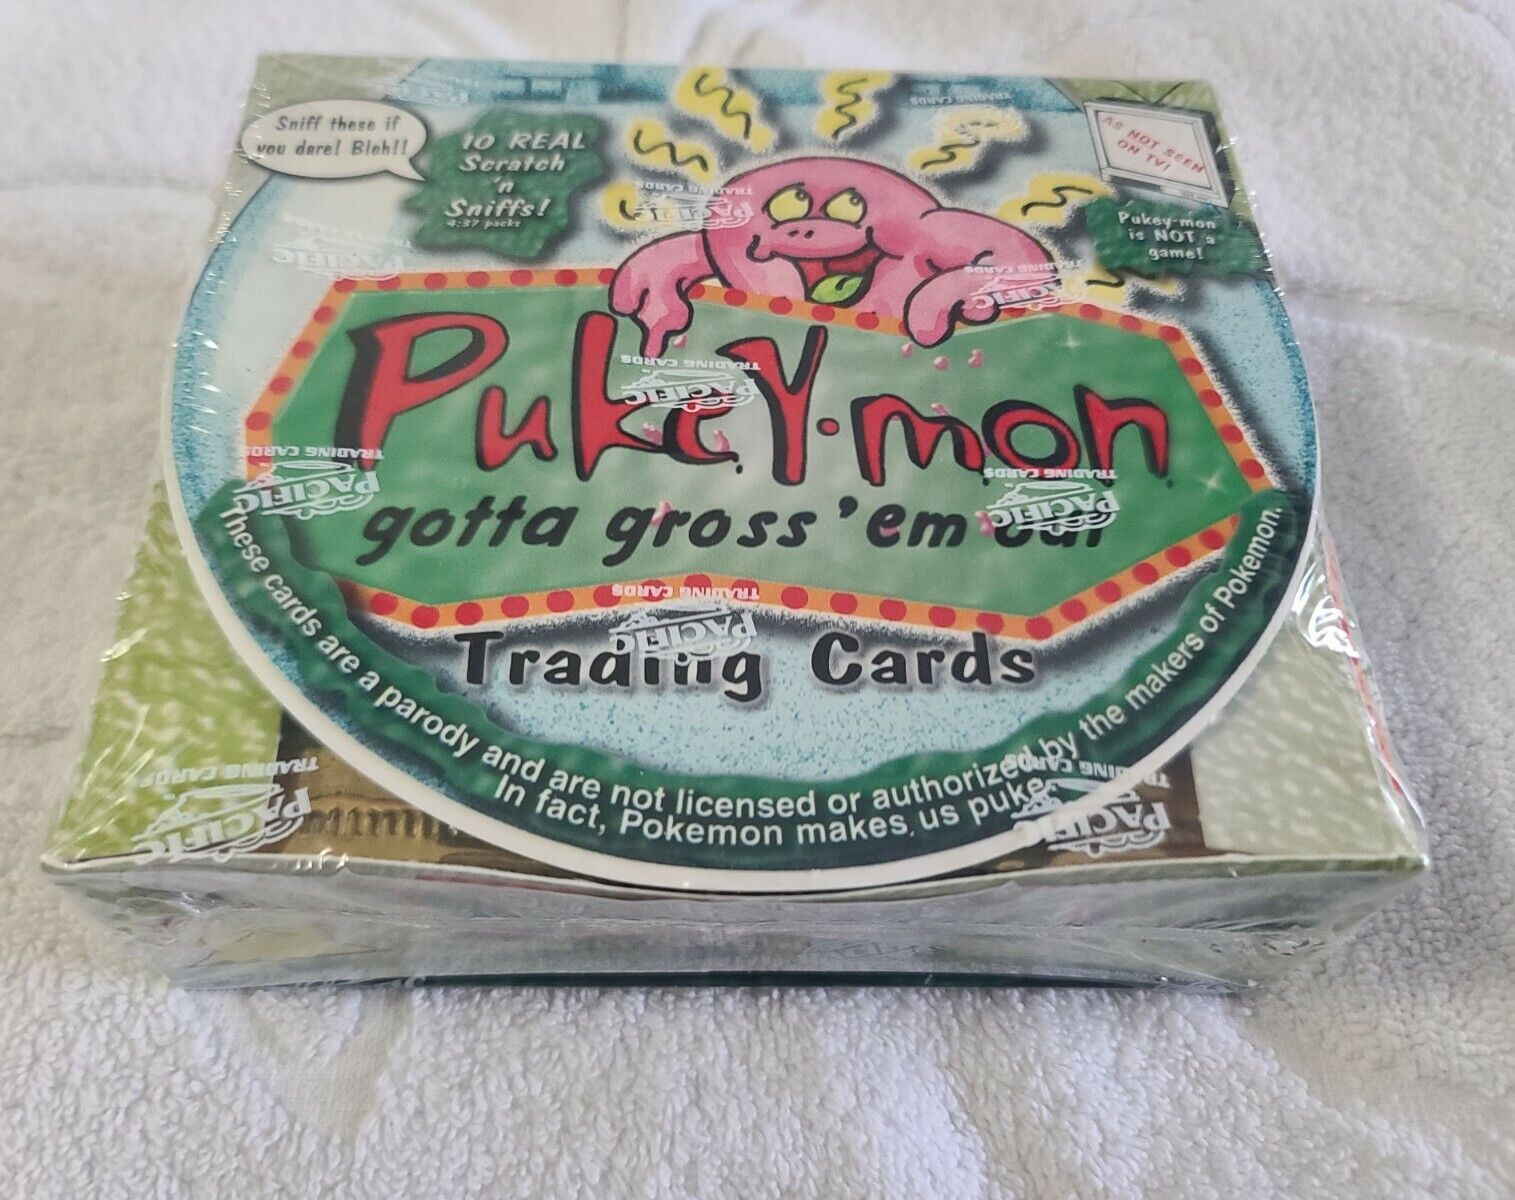 2000 Pacific Pukey-Mon Factory Sealed Trading Card Box (New)